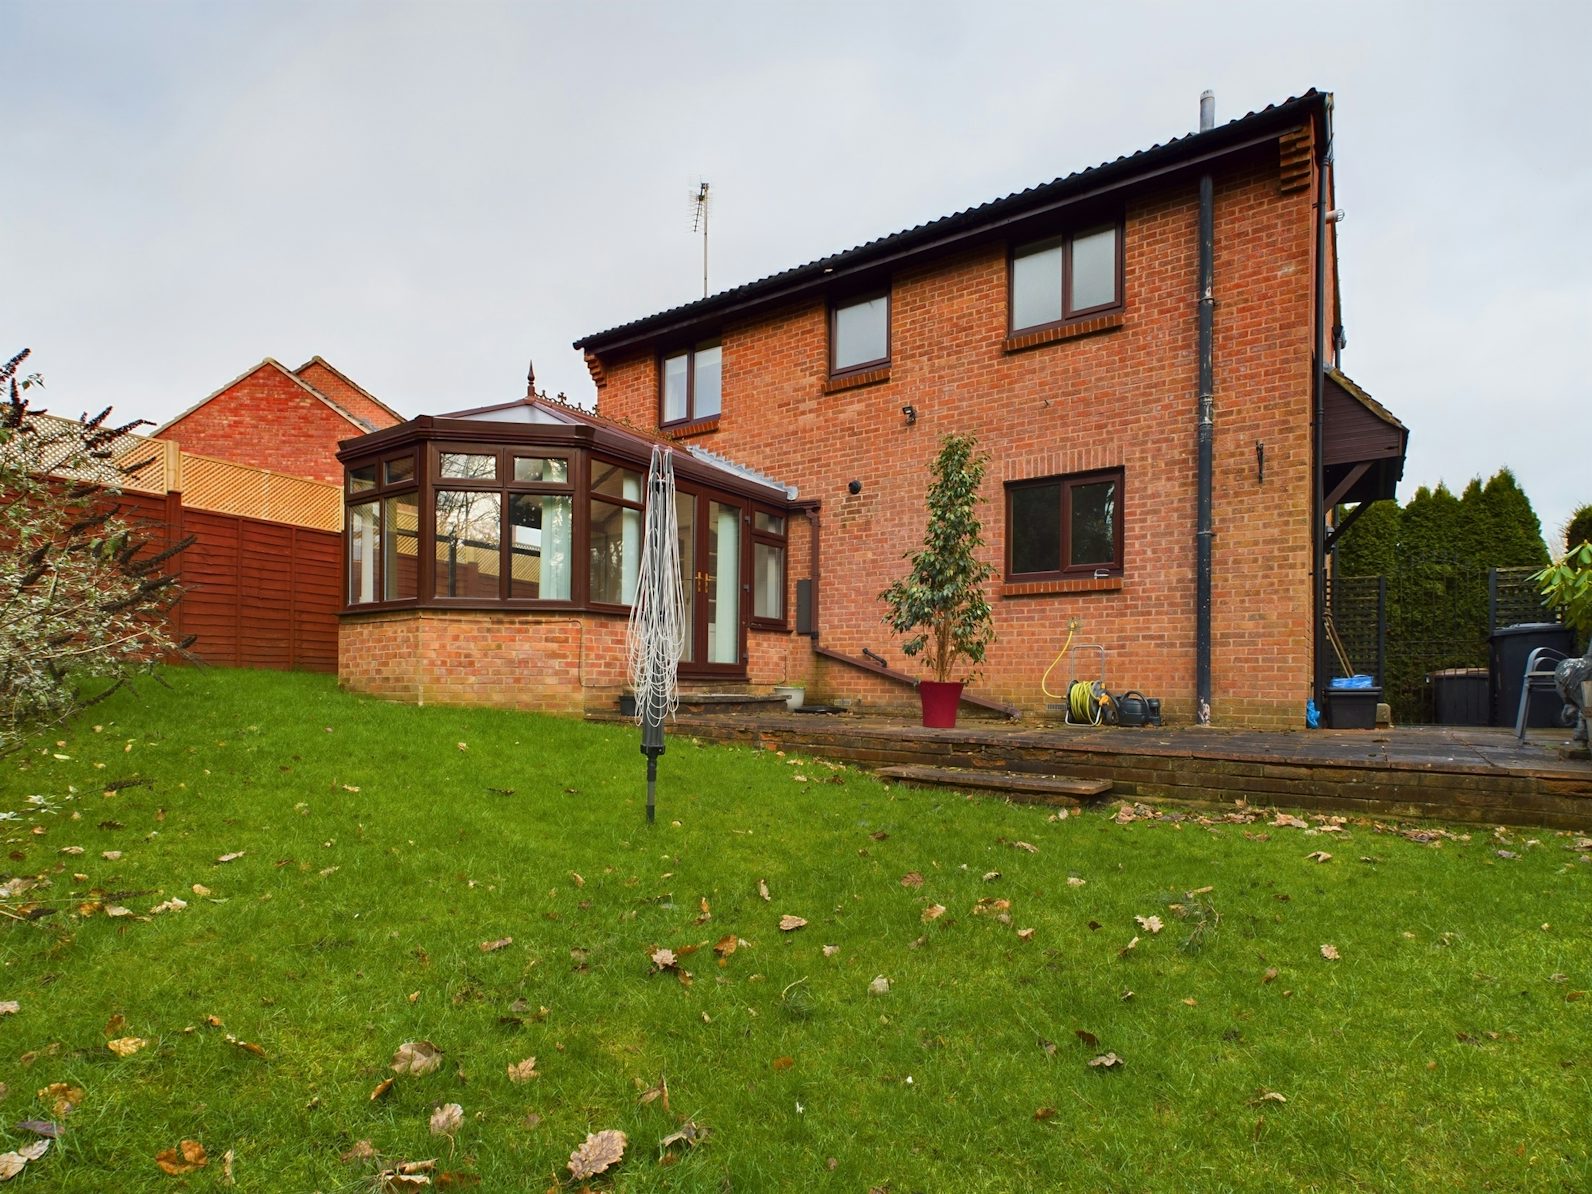 Detached House to rent on Norwood Grove Harrogate, HG3